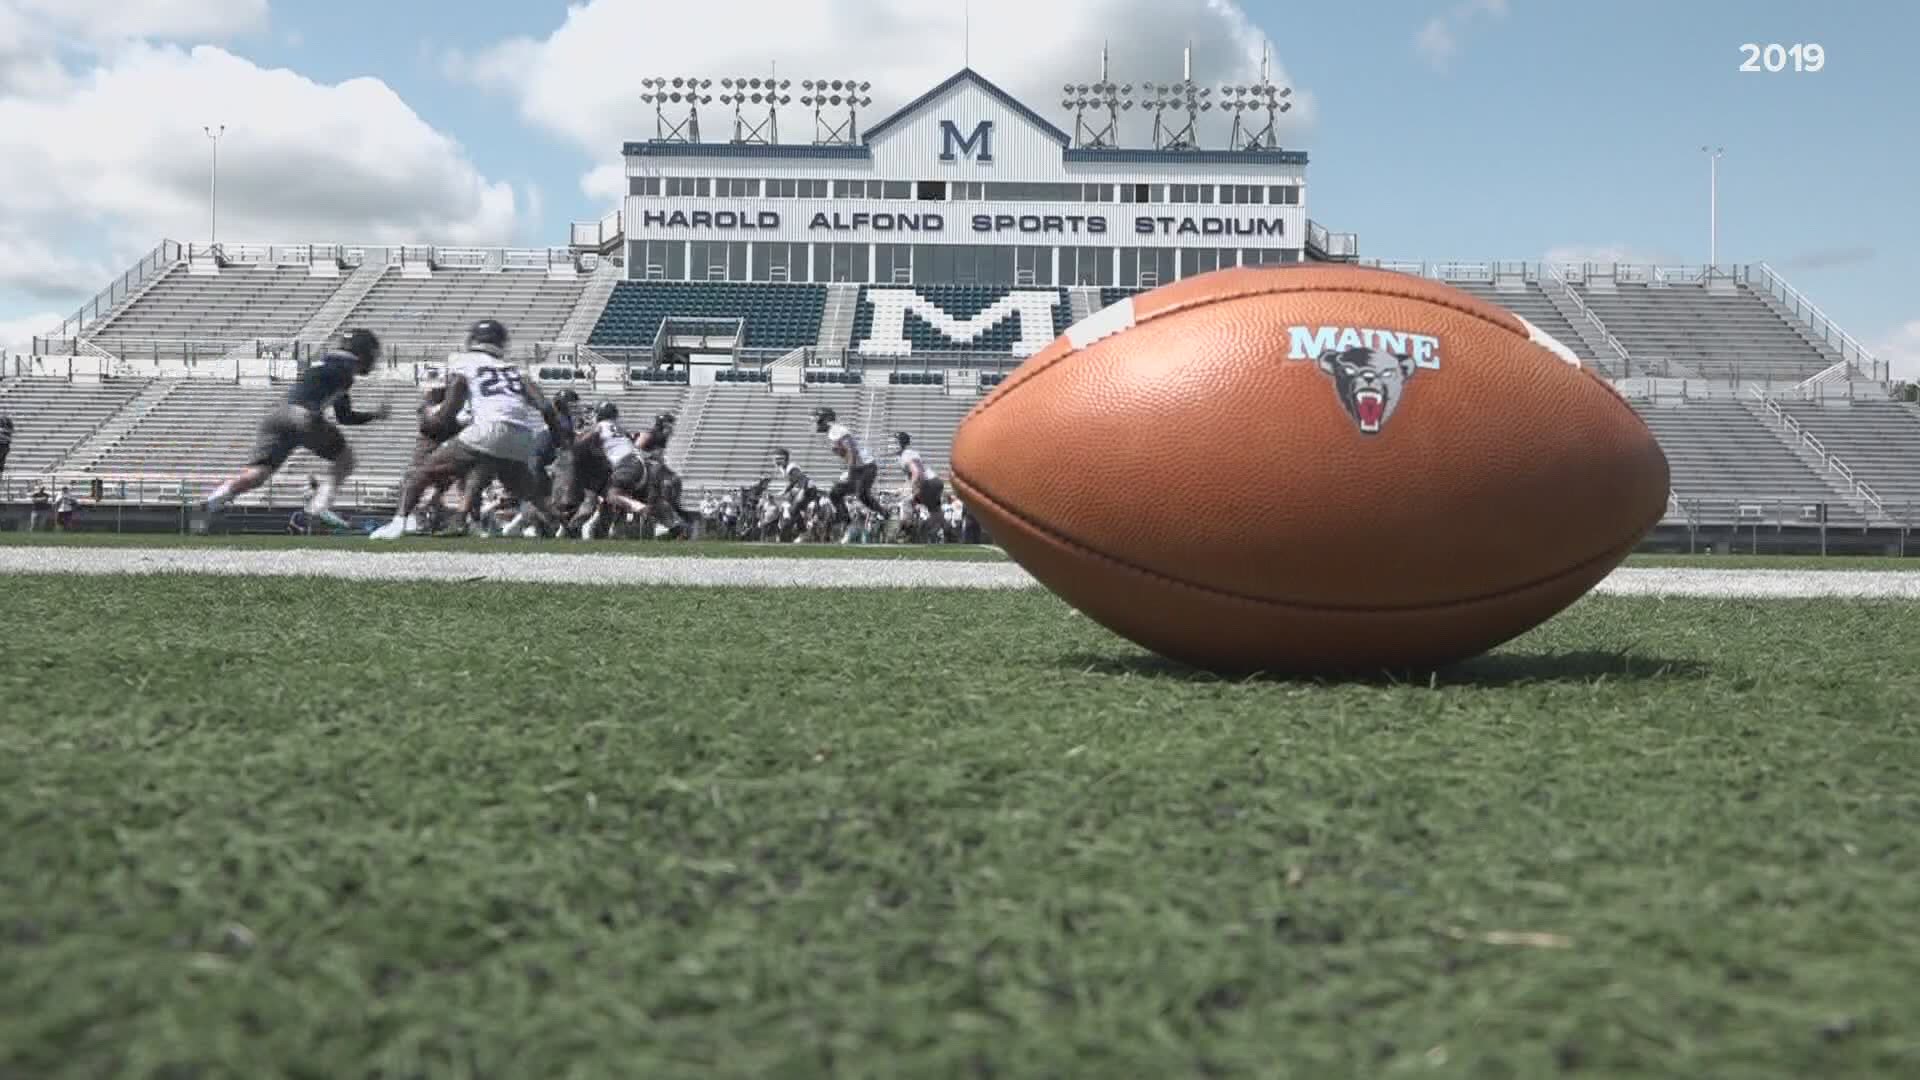 The University of Maine football team will be playing this season after all, but not until Spring.